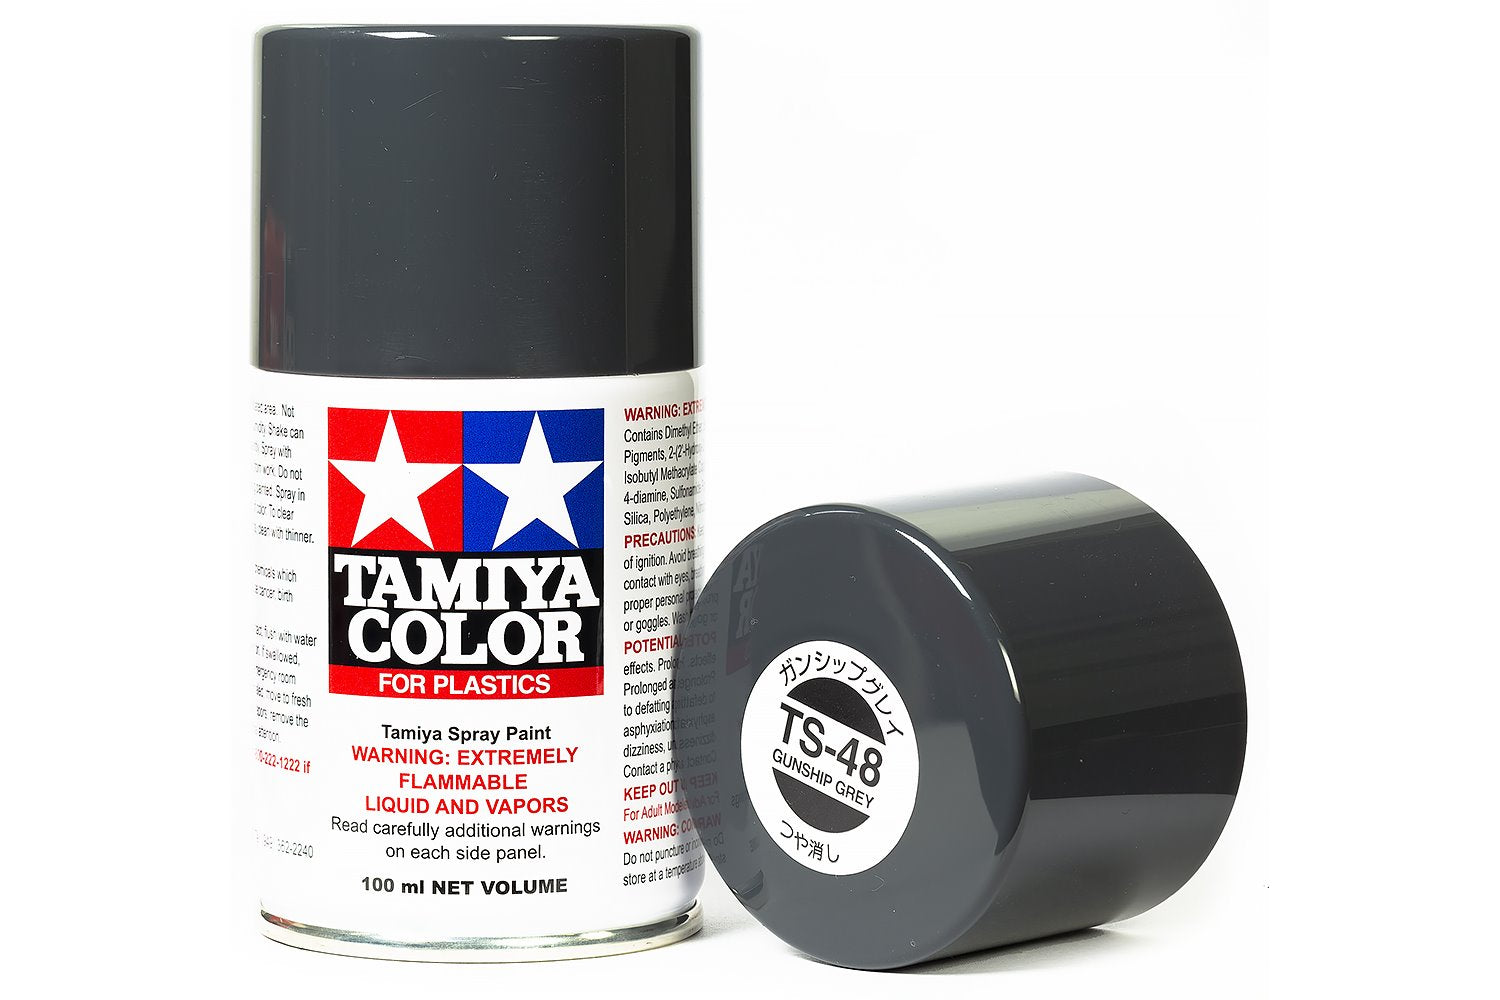 Bottled lacquer paints from Tamiya mean you can broaden your